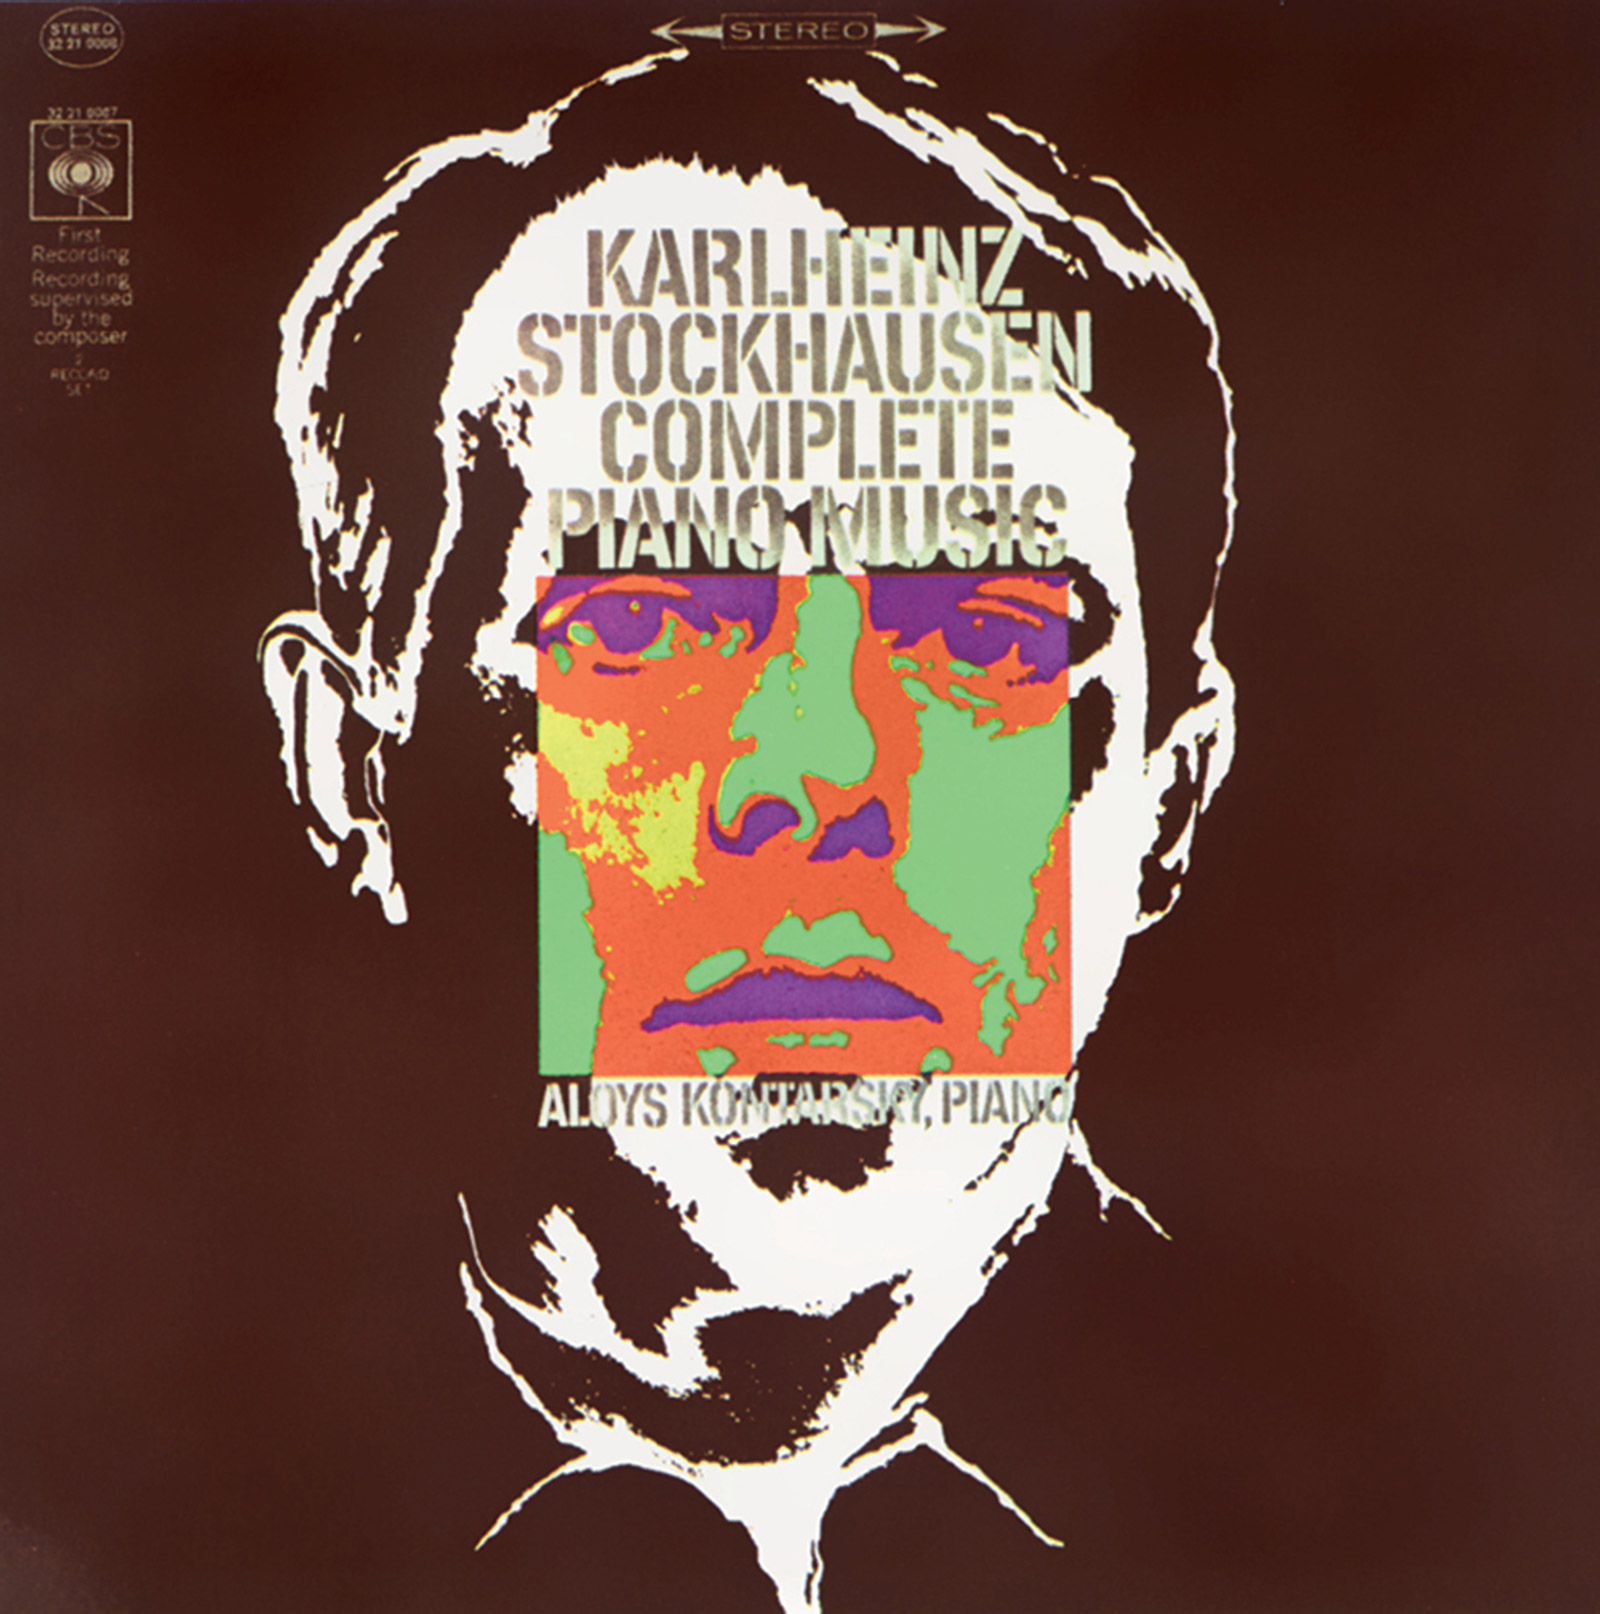 An LP cover of Karlheinz Stockhausen’s “Complete Piano Music” from circa nineteen sixty-seven, which uses a range of fluorescent colors. 